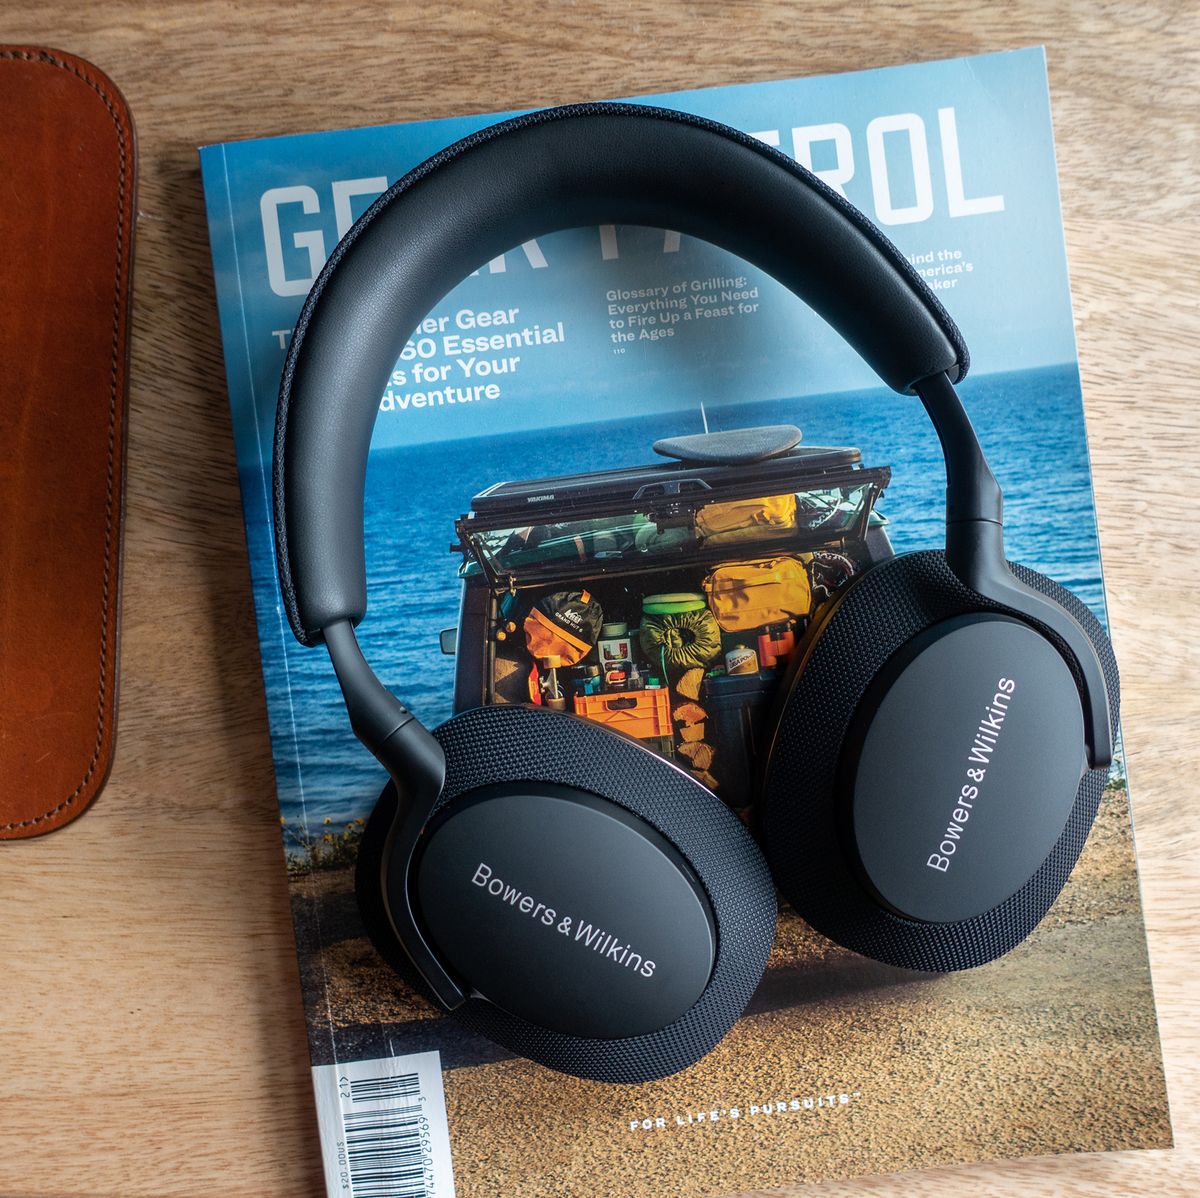 Bowers Wilkins S2 Headphones Review: a Great